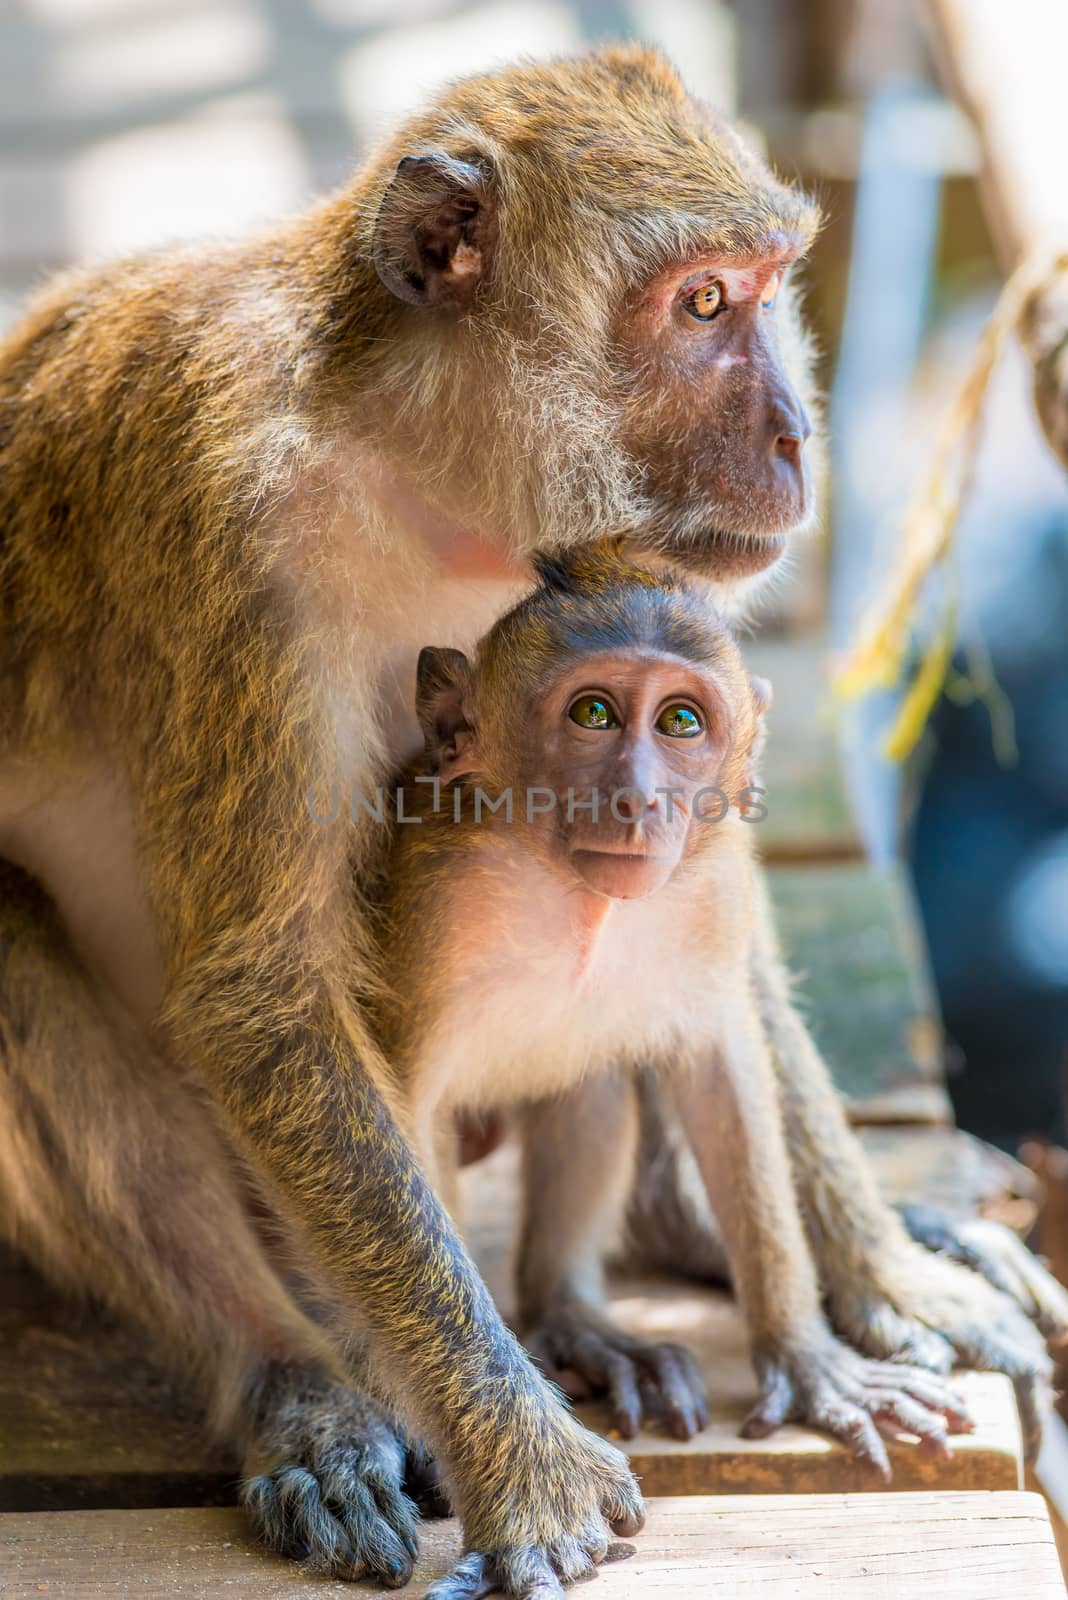 little baby and his mom bask in the sun, Thailand by kosmsos111